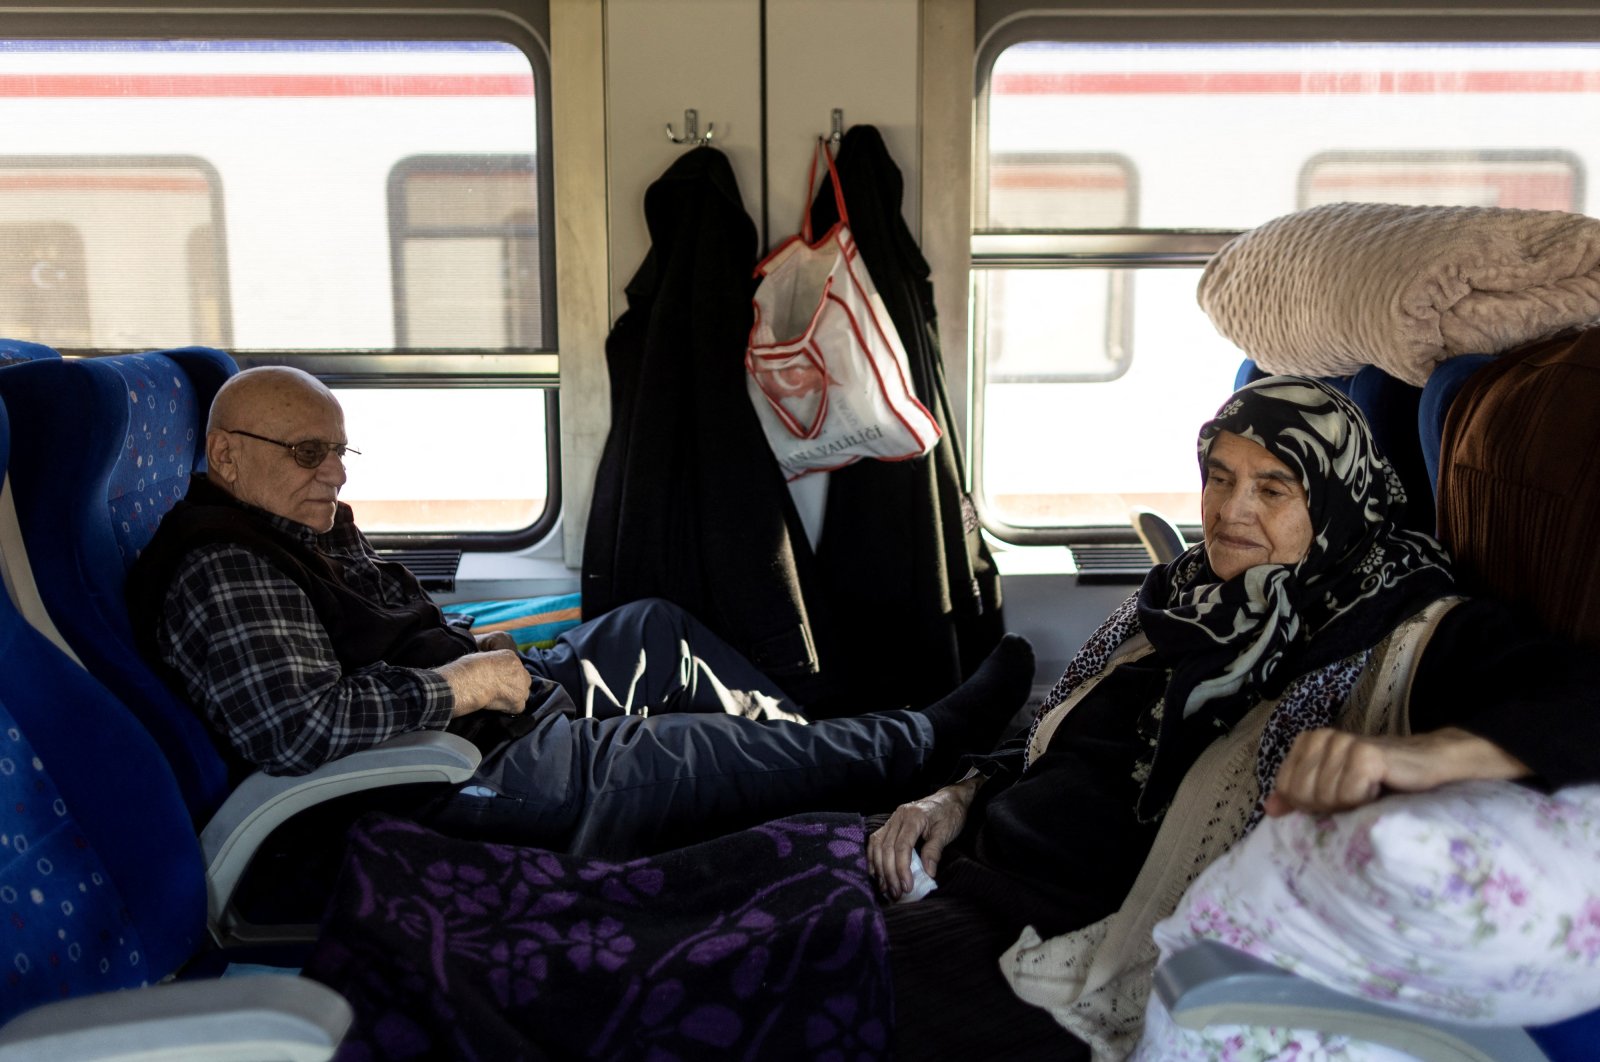 A quake victim couple sit in a train at Iskenderun station, where train carriages have been turned into temporary shelters for victims of the recent deadly earthquake, in Iskenderun, Türkiye, Feb. 15, 2023. (Reuters Photo)